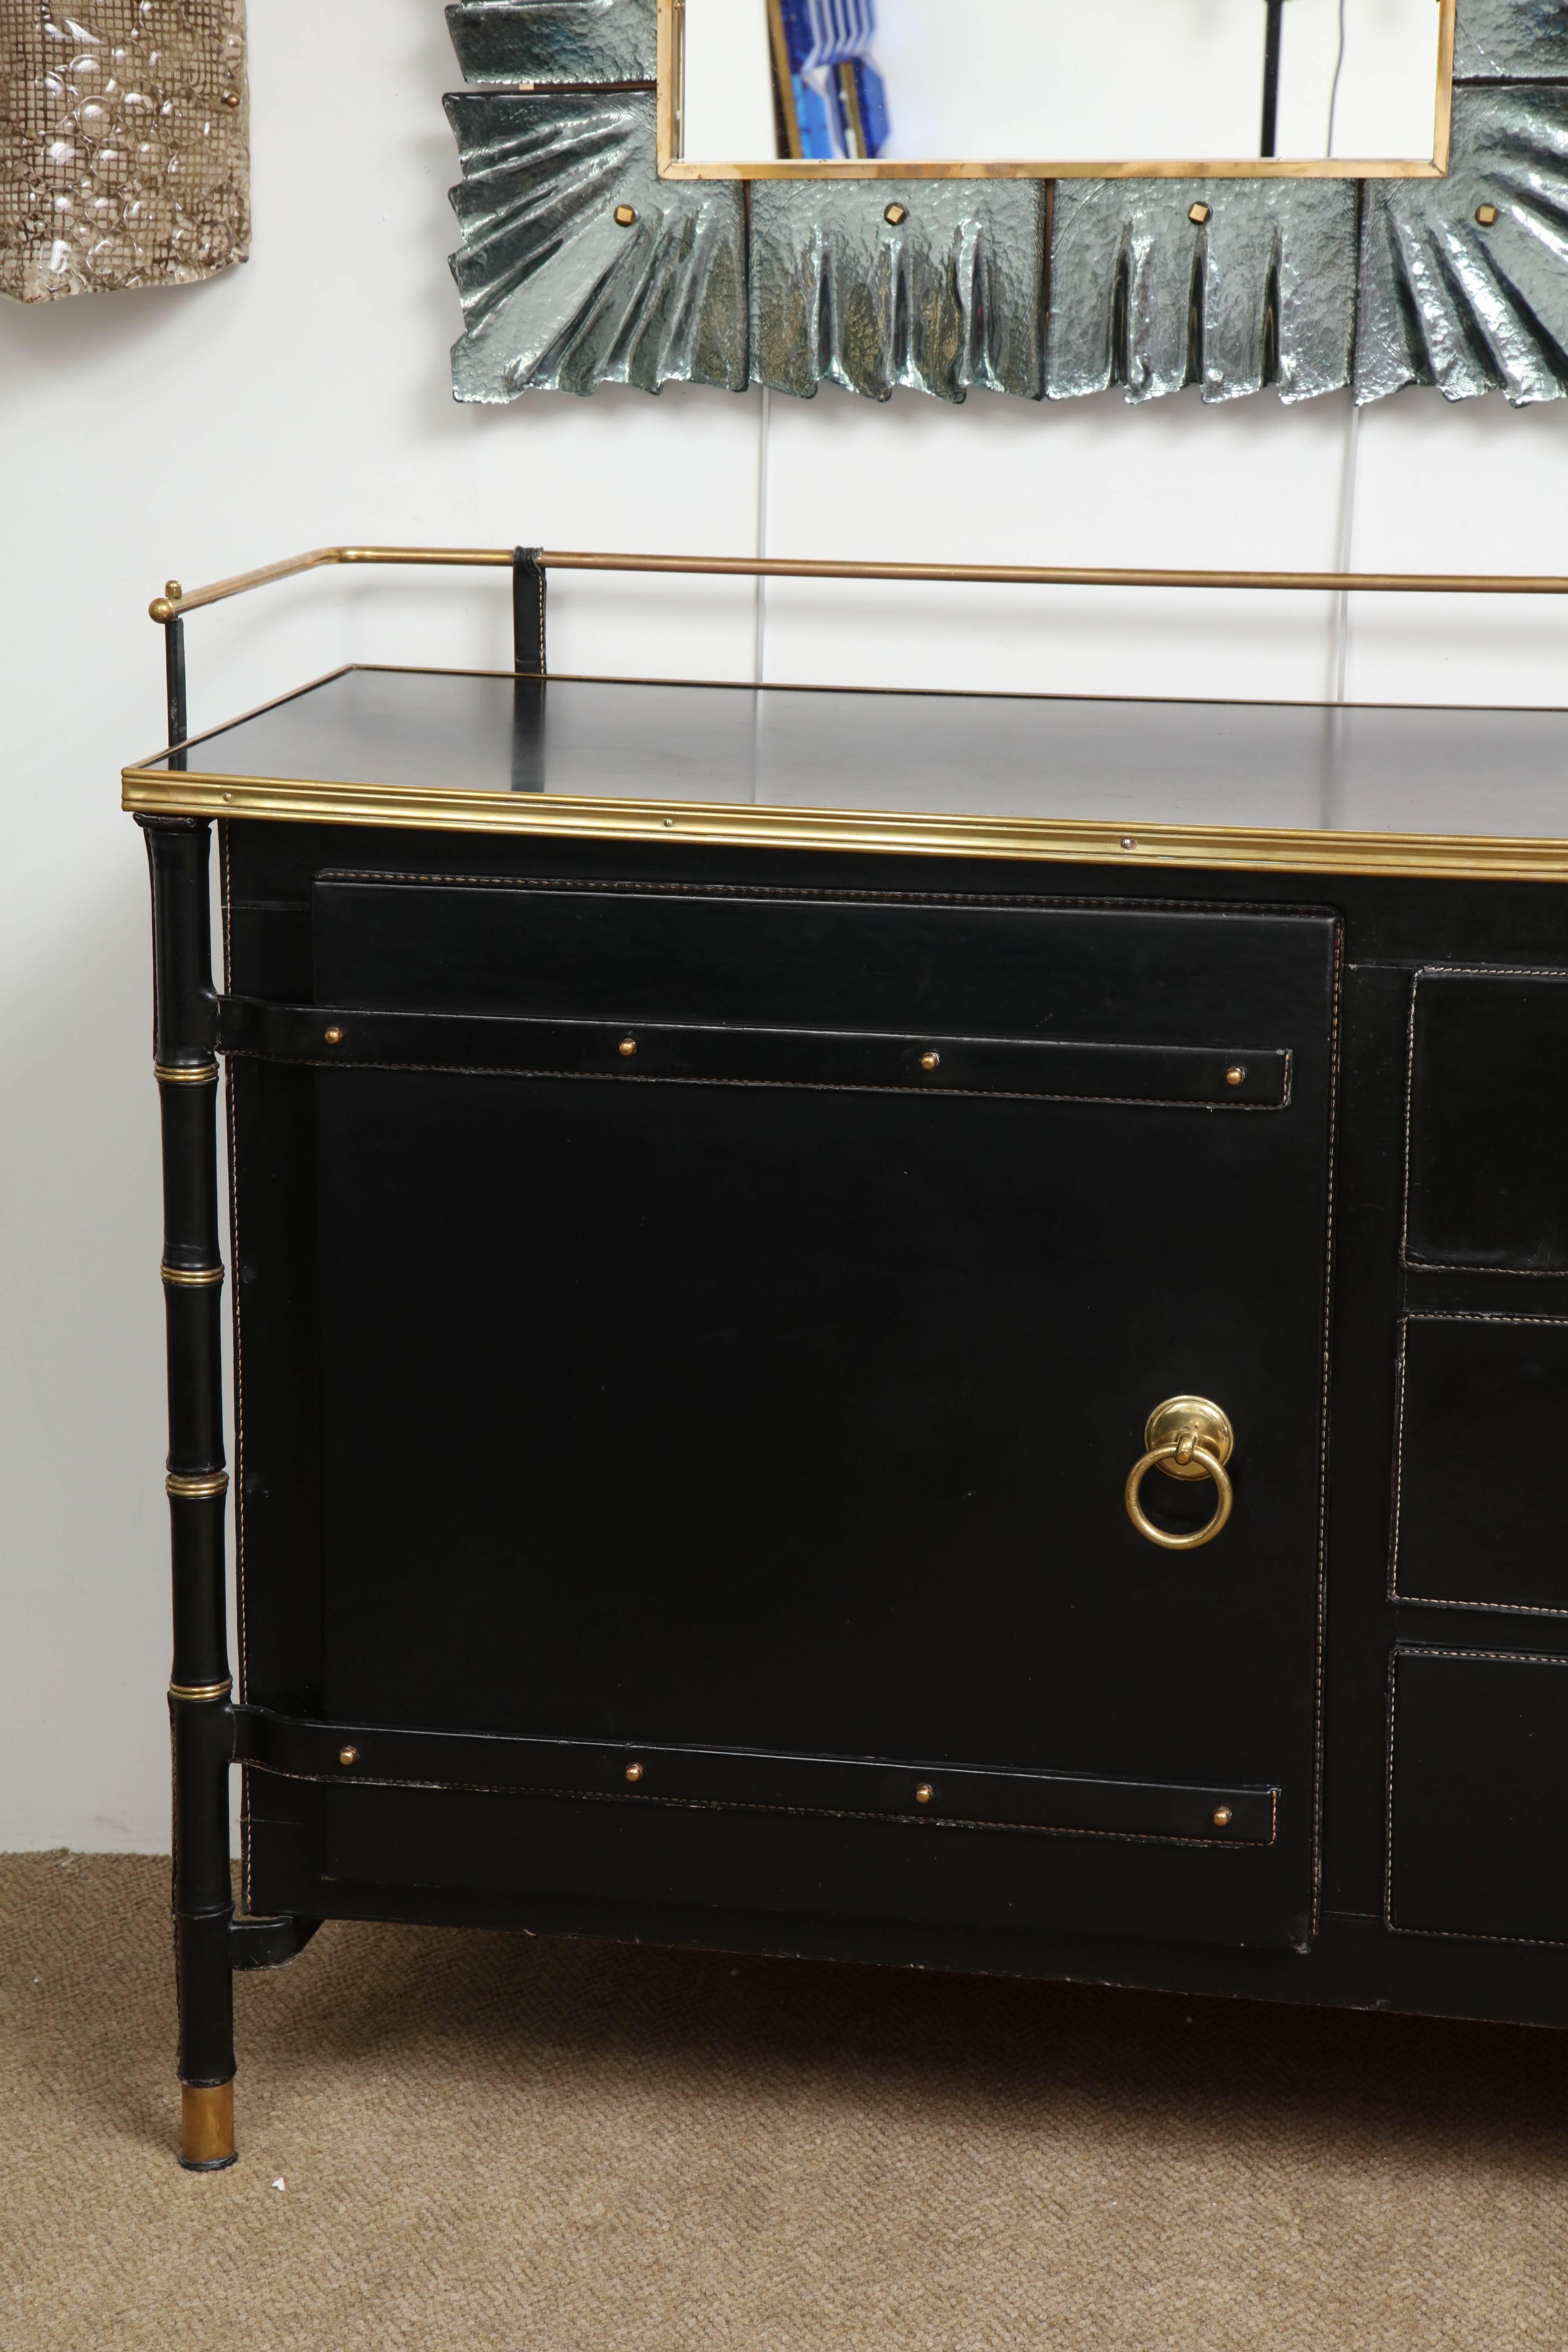 Rare and fine black hand-stitched leather by Jacques Adnet. Two doors on each side concealing shelves, suite of three drawers in the center. Solid brass handles. Oak interior.
France 1950's